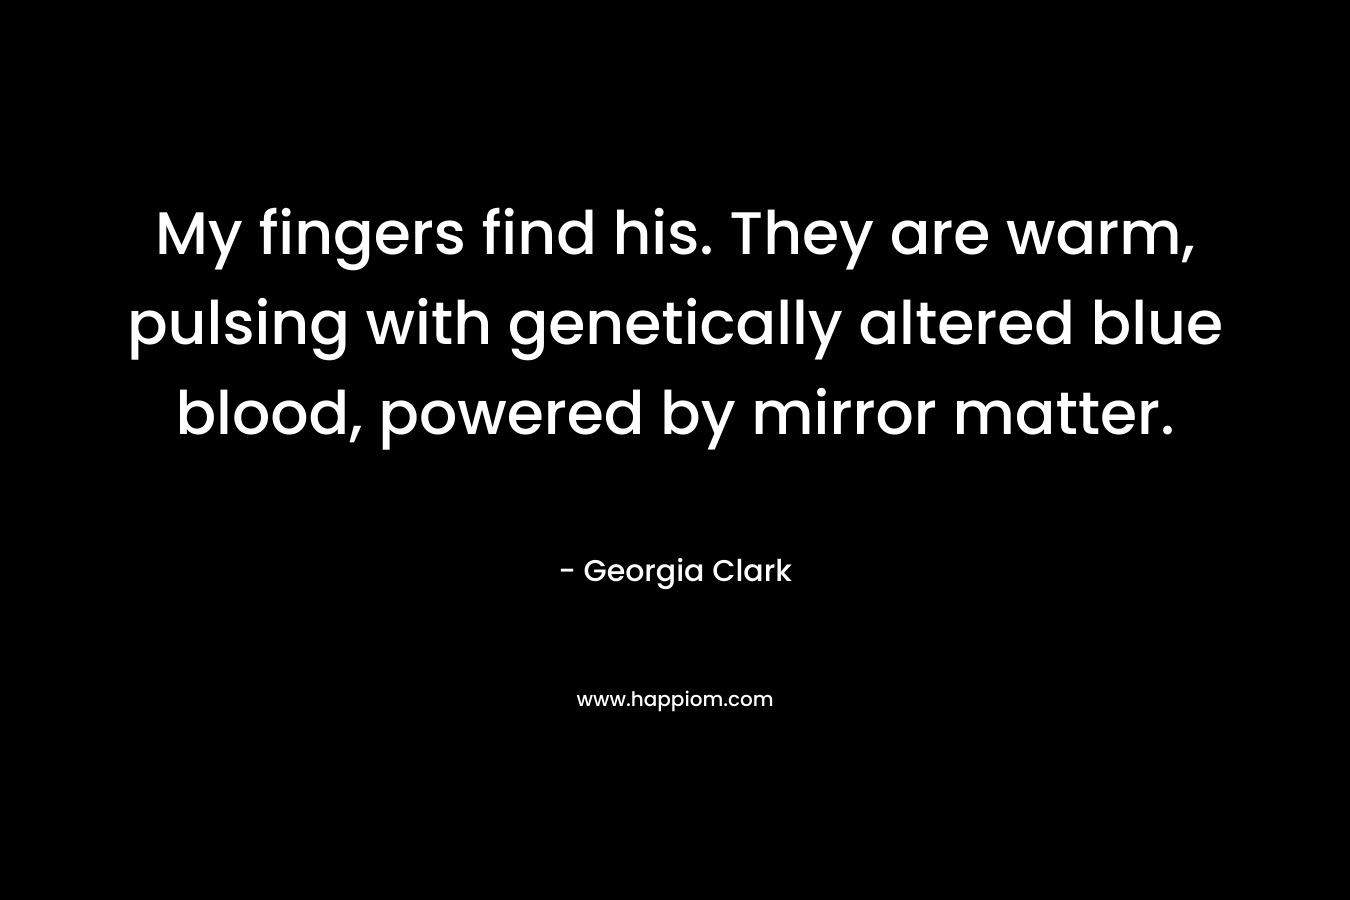 My fingers find his. They are warm, pulsing with genetically altered blue blood, powered by mirror matter. – Georgia Clark